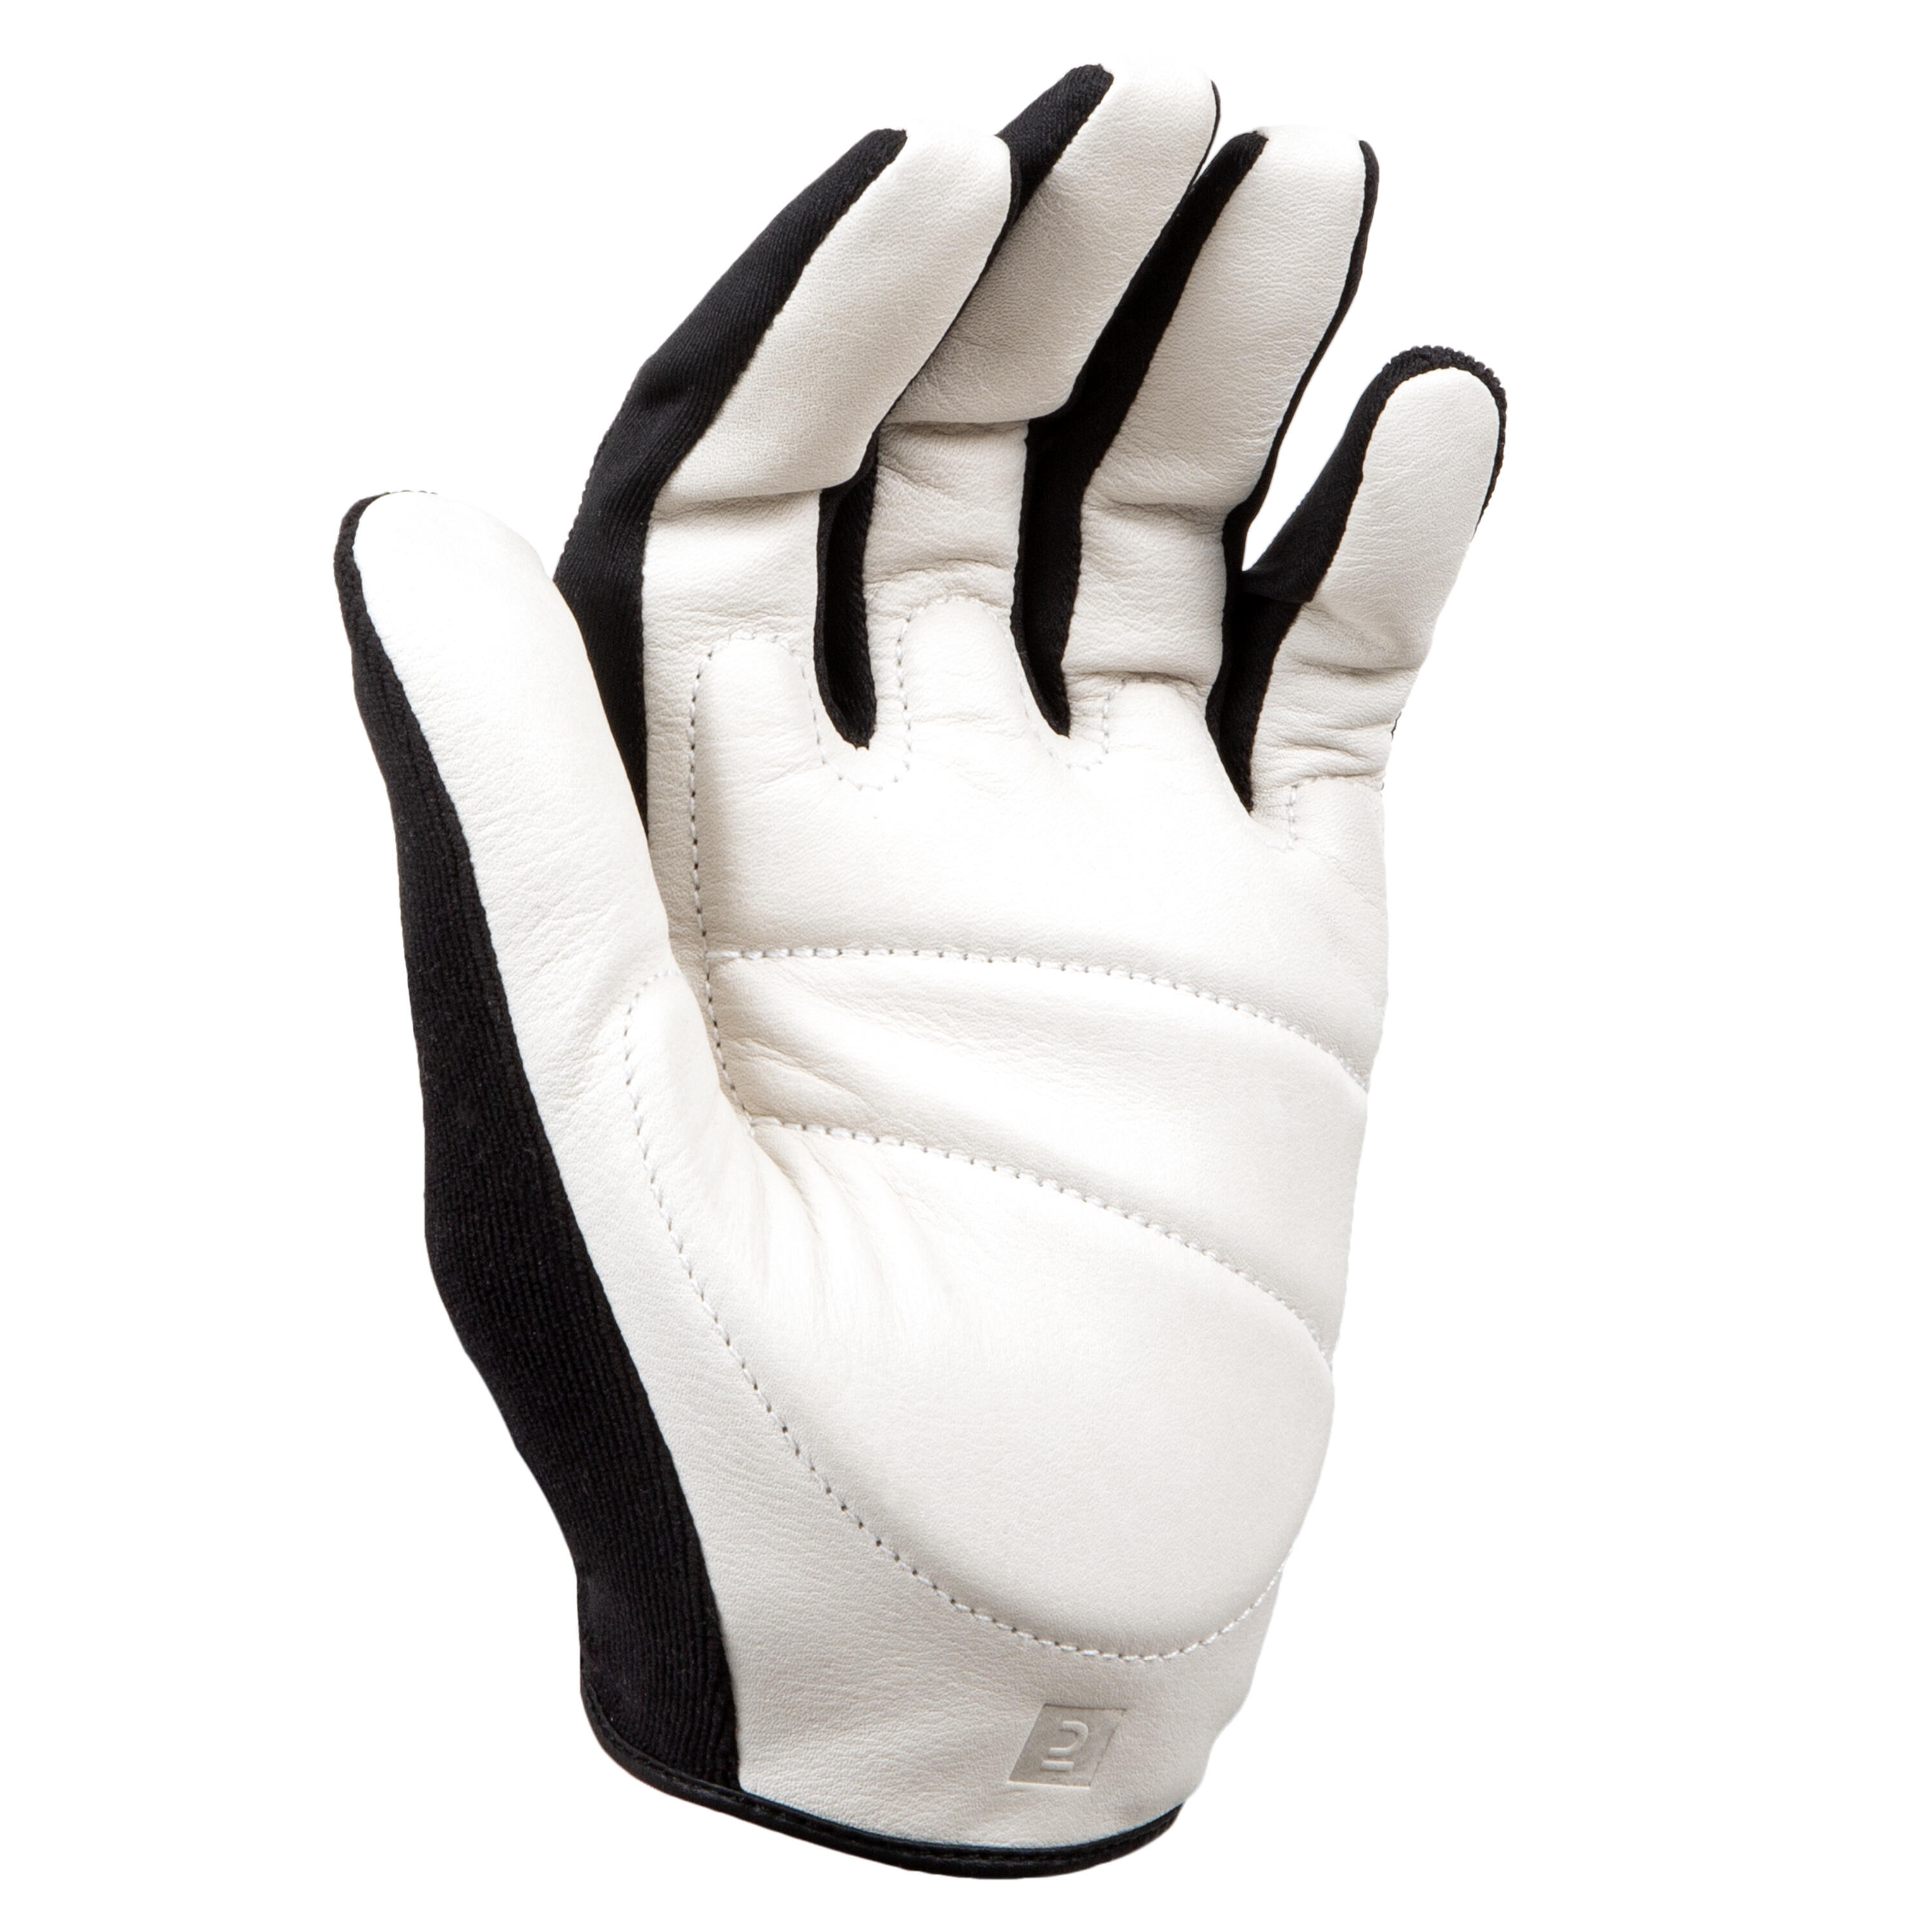 Padded One Wall / Wallball Gloves OW 500 4/7